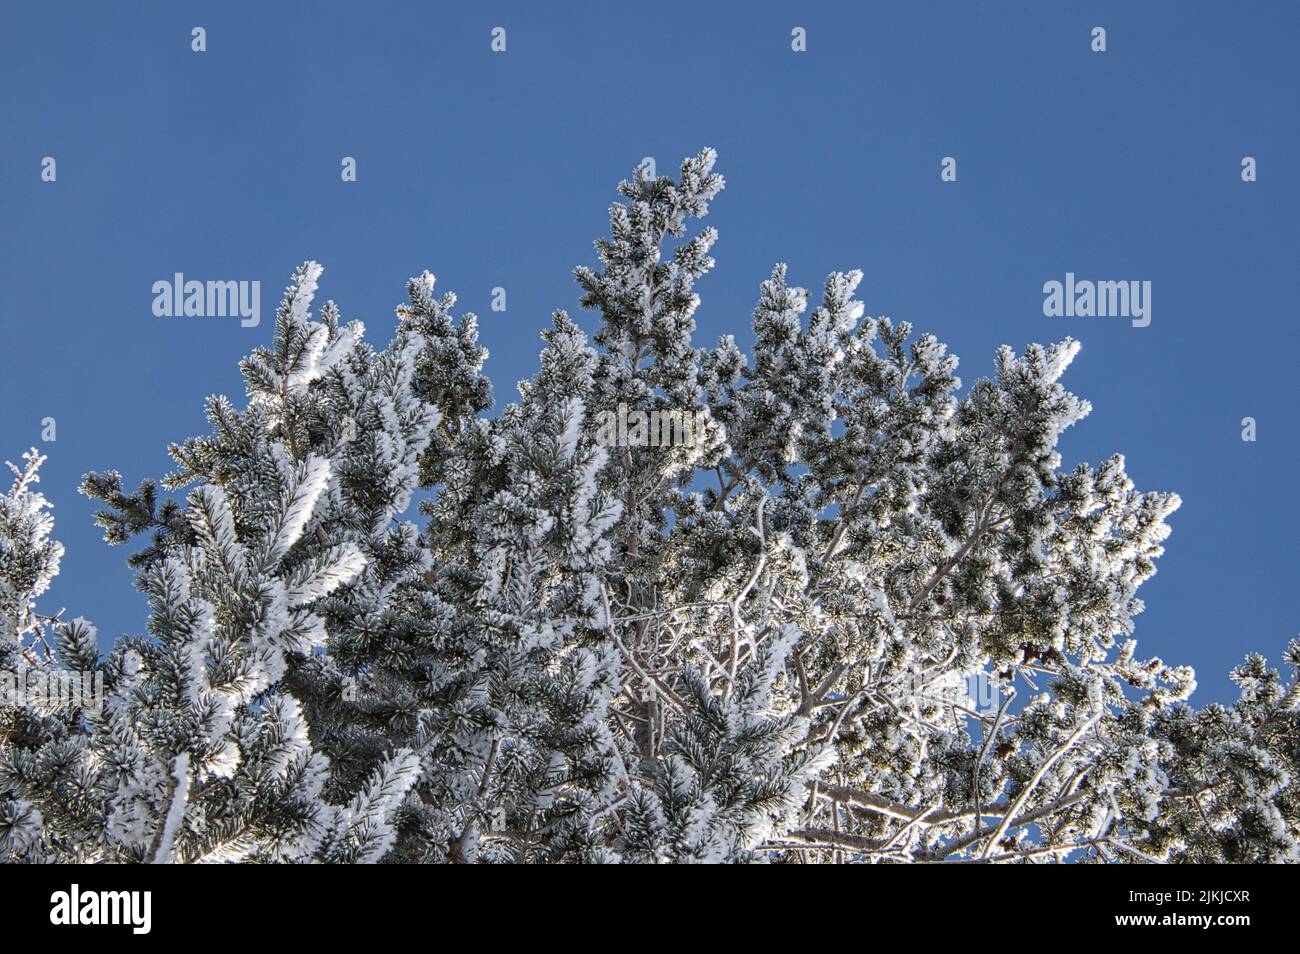 A top of a pine tree covered with snow under the blue clear sky Stock Photo